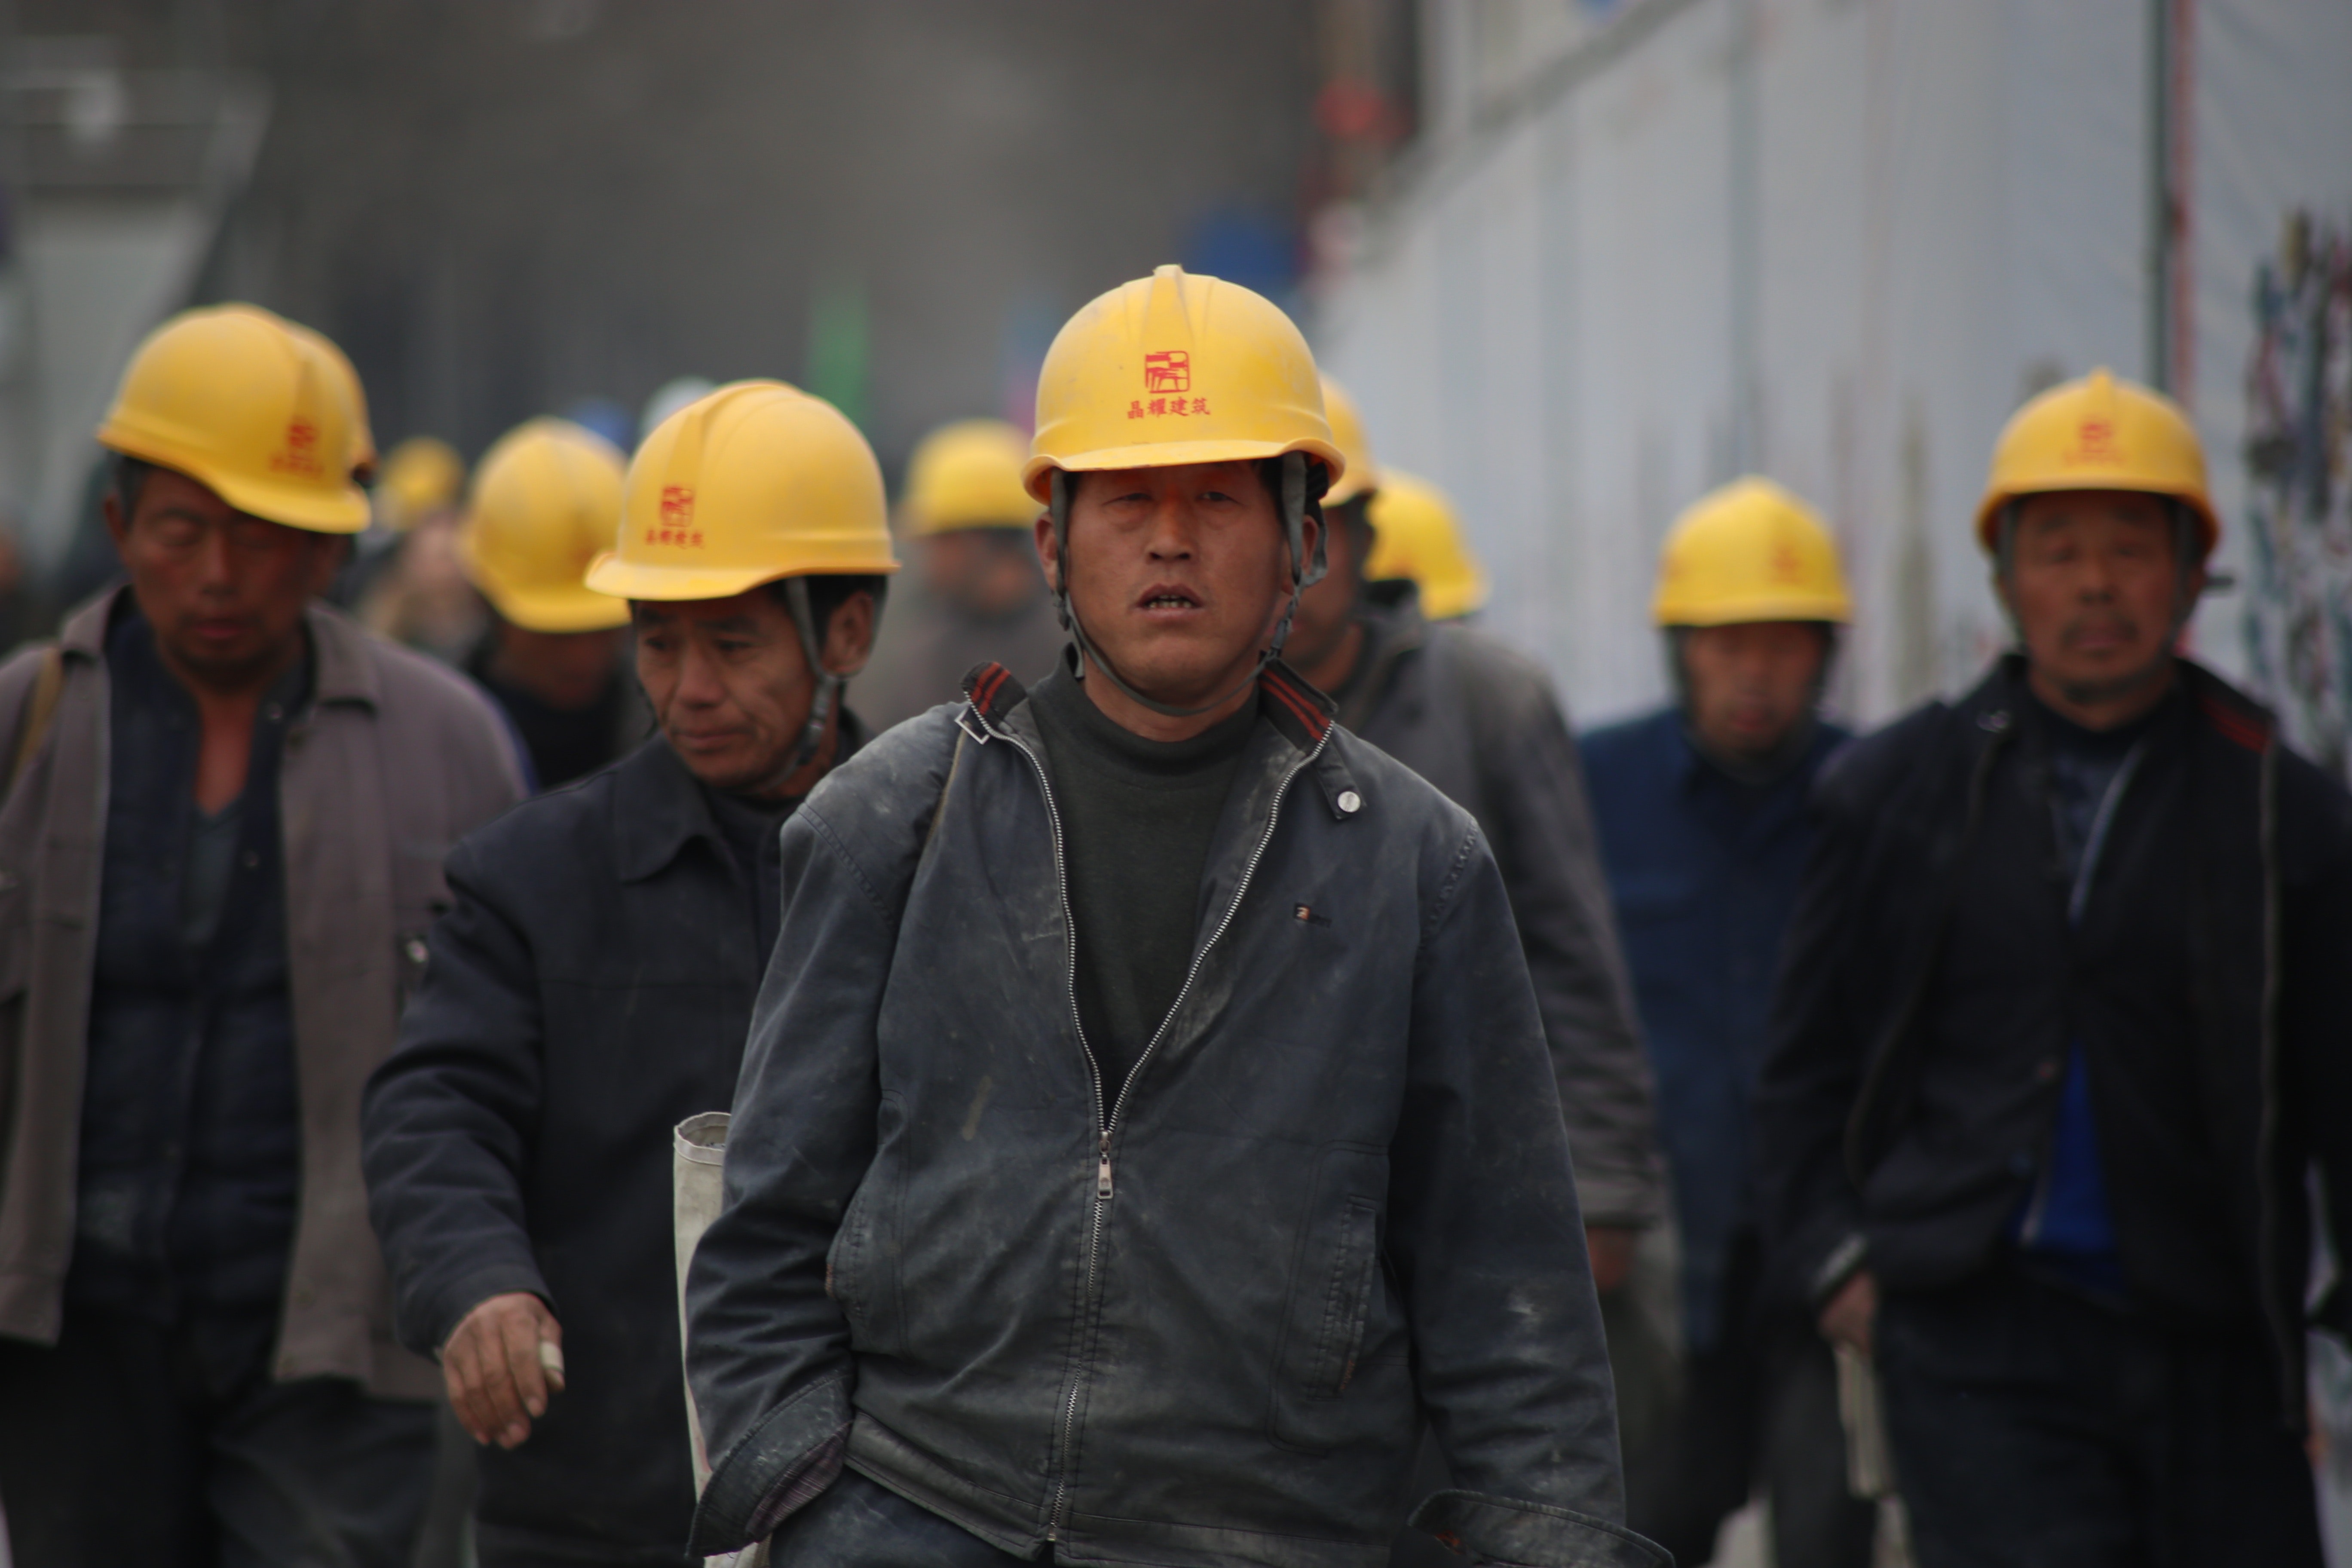 Group of Persons Wearing Yellow Safety Helmet during Daytime, Asian, Chinese, Industry, Men, HQ Photo